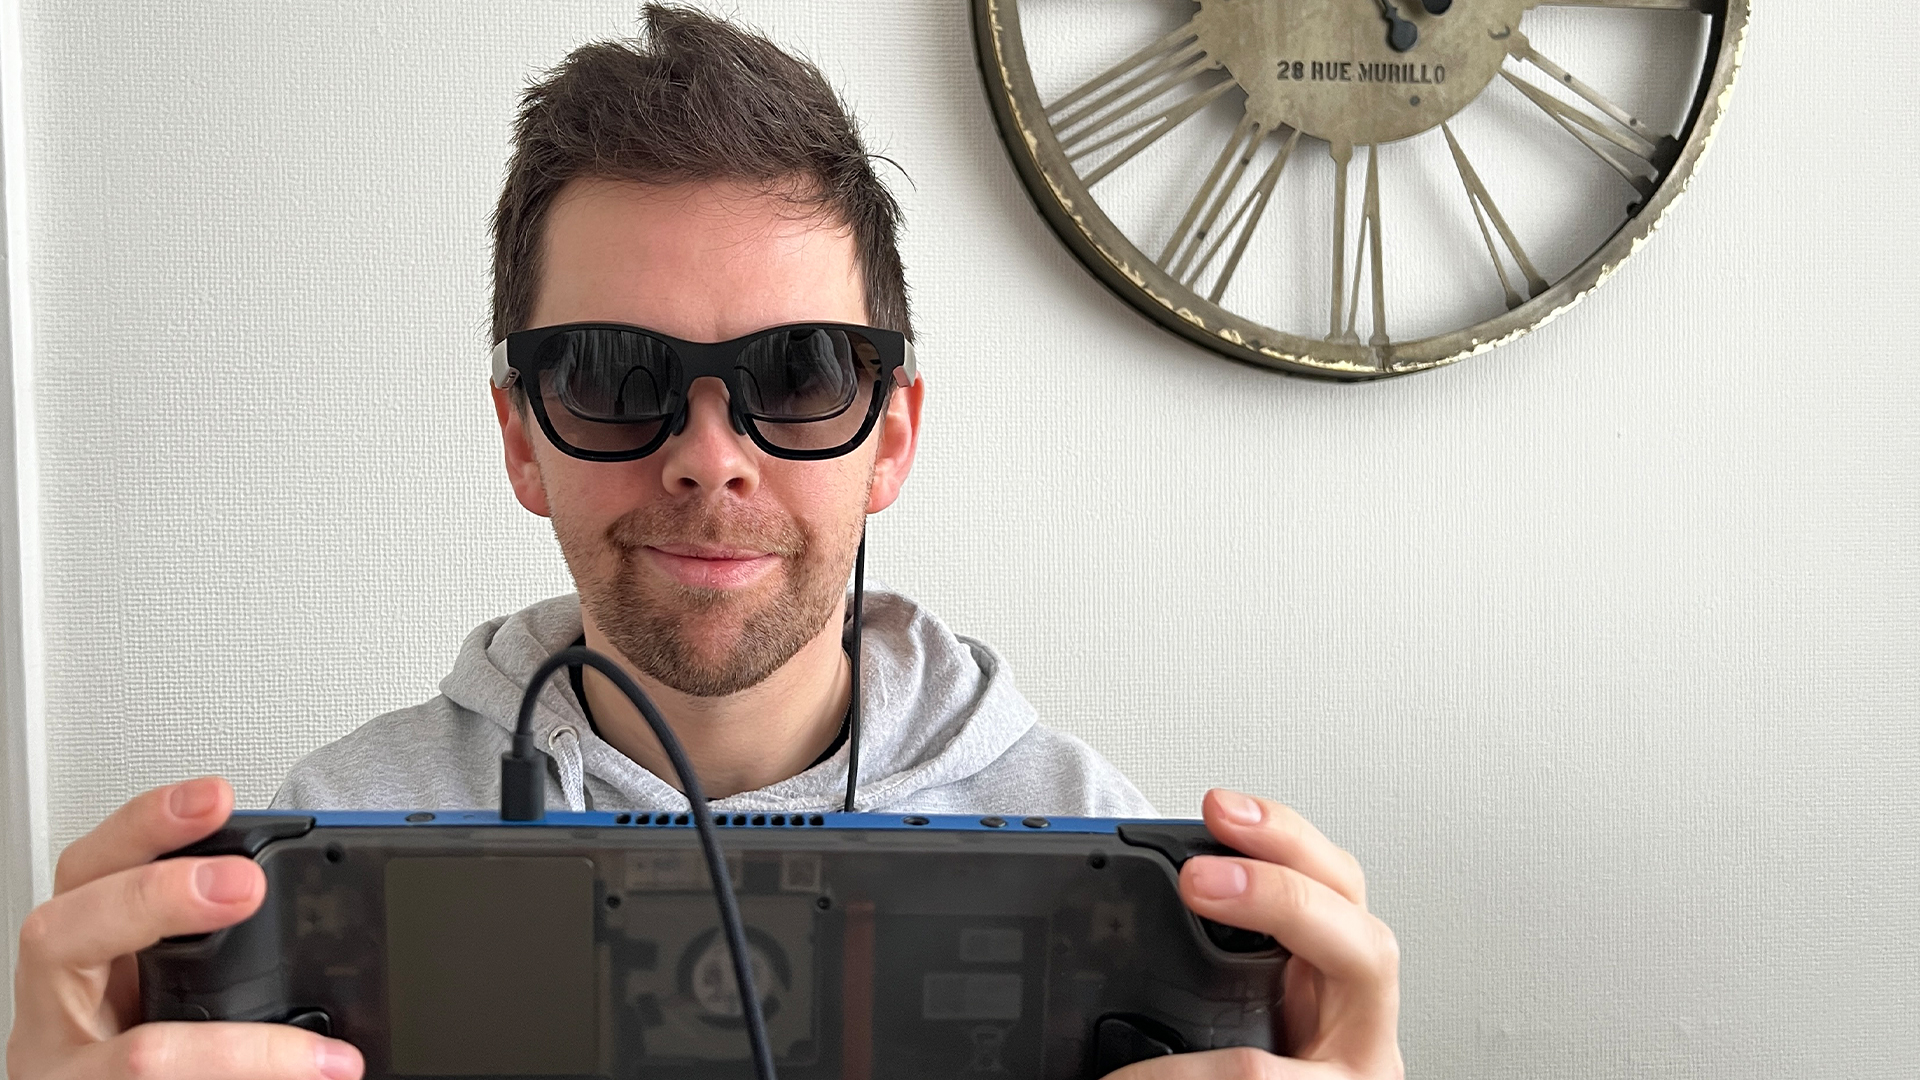 Nreal Air Glasses: Like Looking Into The Possible Future Of Gaming